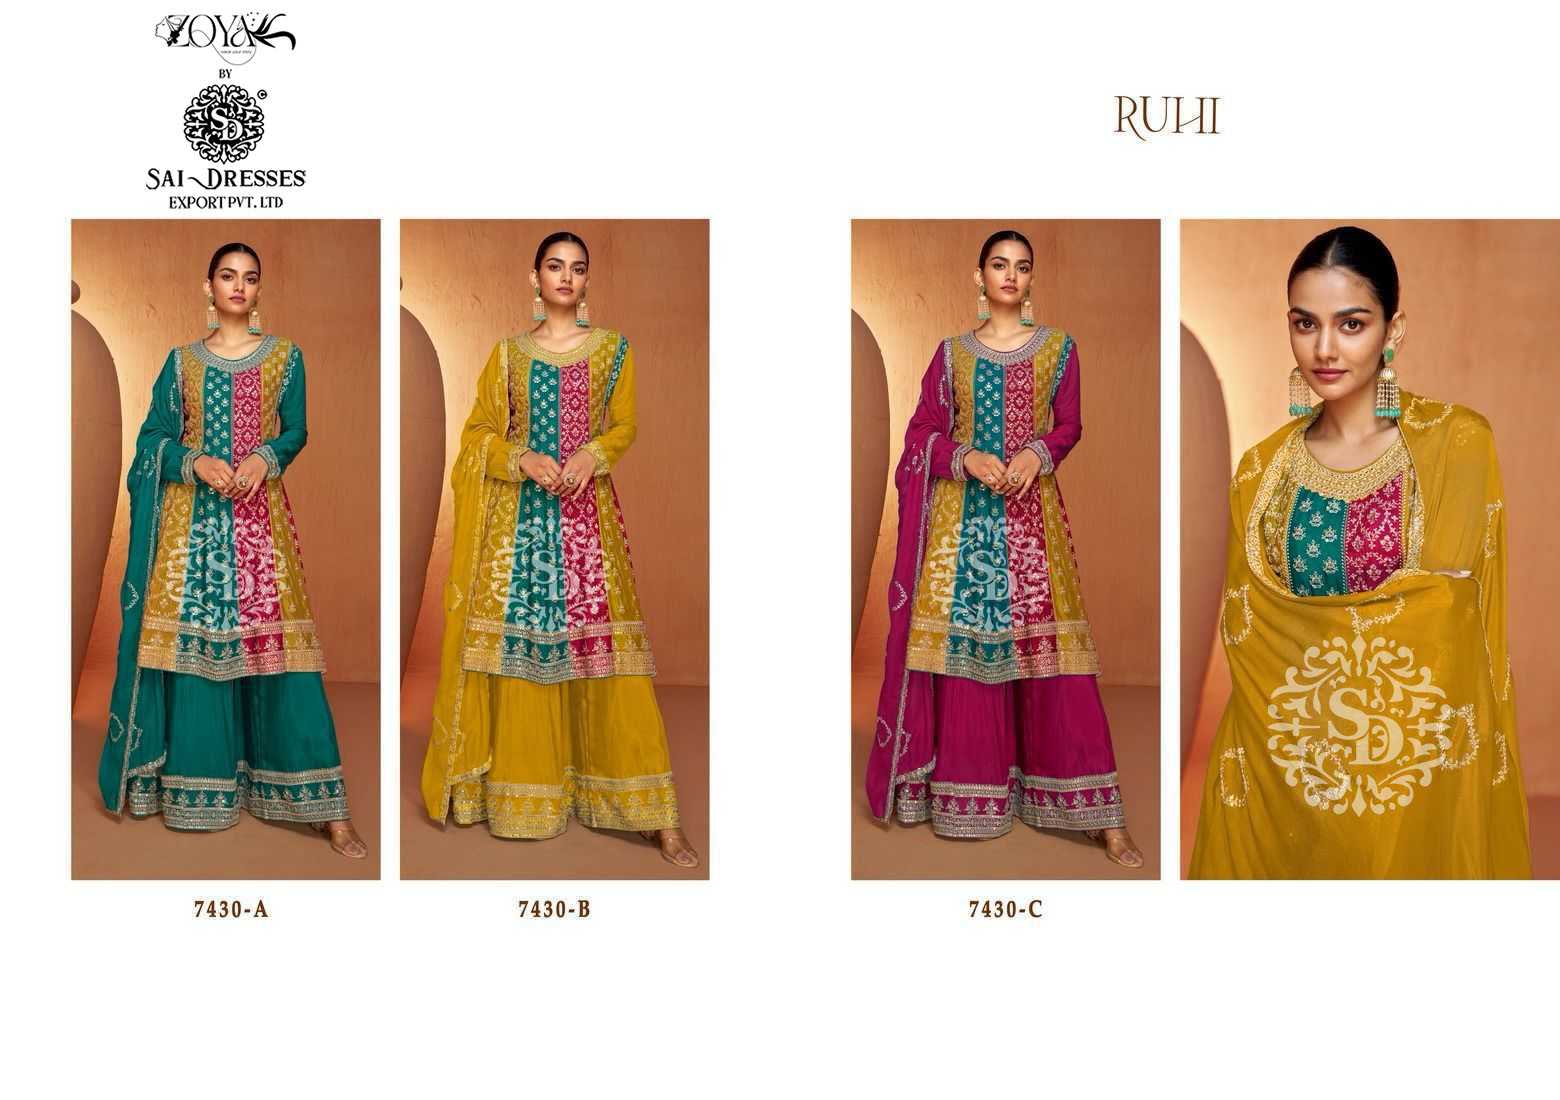 SAI DRESSES PRESENT RUHI READYMADE EXCLUSIVE CLASSY WEDDING WEAR PEPLUM WITH PLAZZO STYLE DESIGNER SUITS IN WHOLESALE RATE IN SURAT